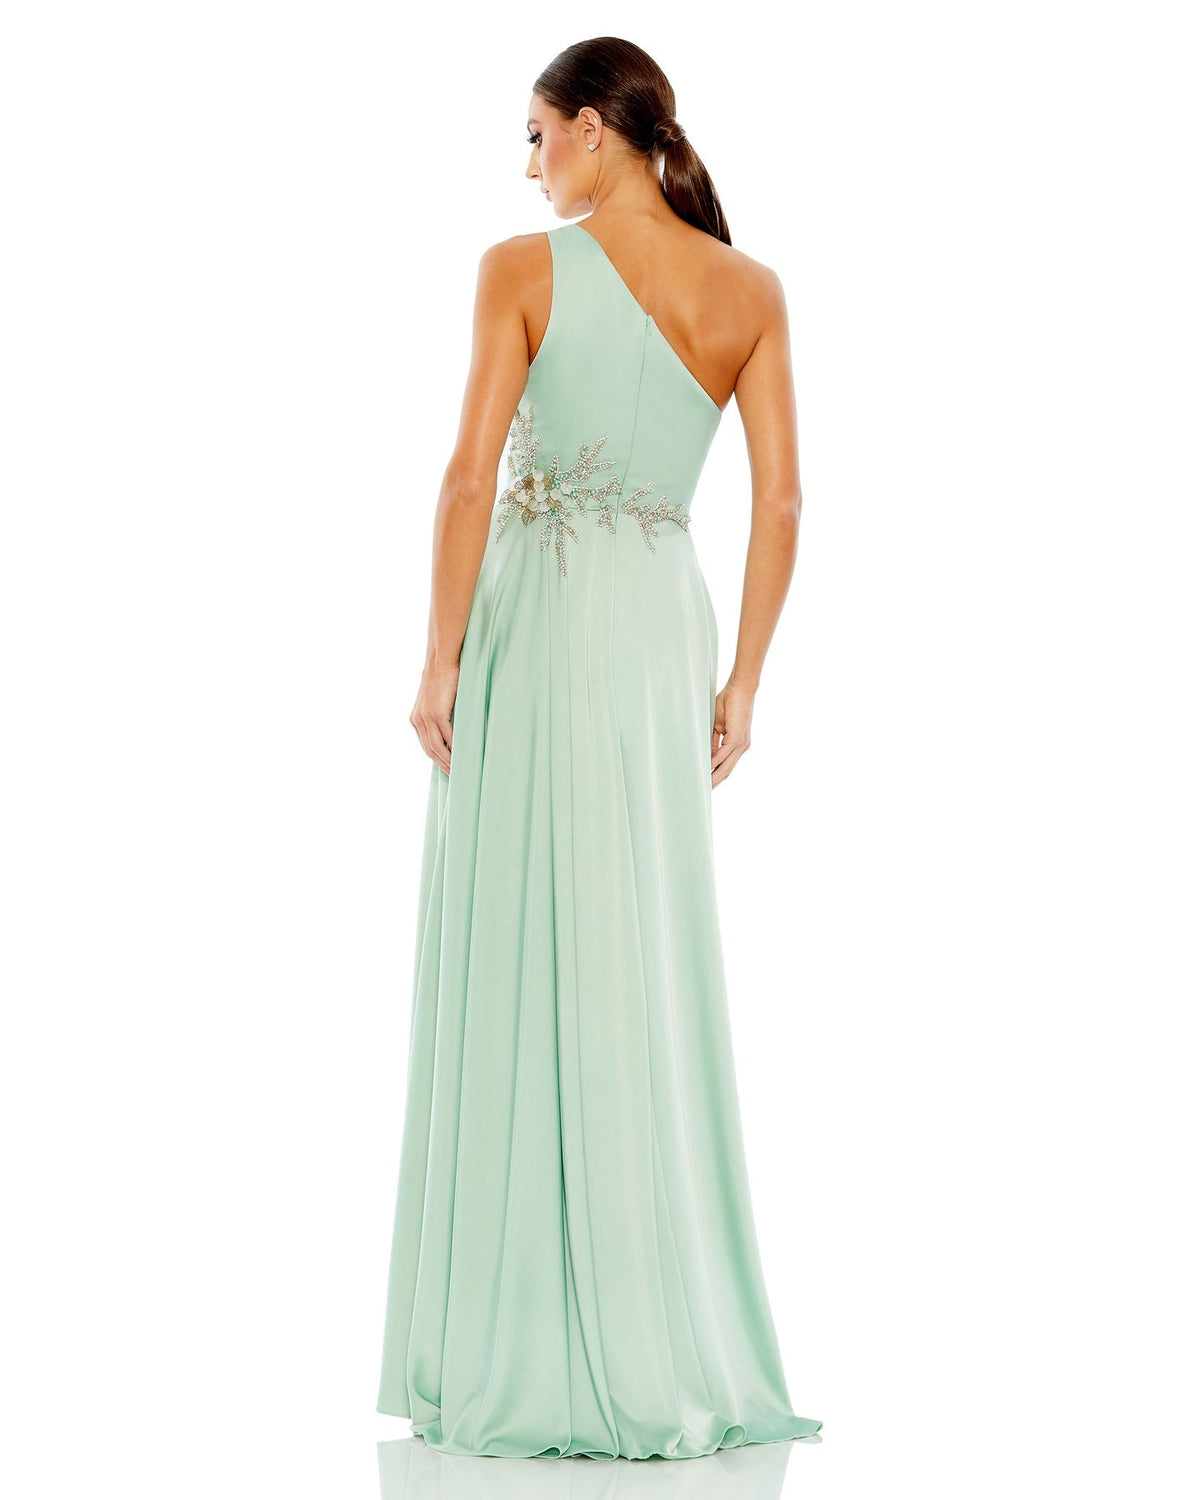 mac duggal EMBELLISHED ONE SHOULDER ASYMMETRICAL GOWN, sage gown back view